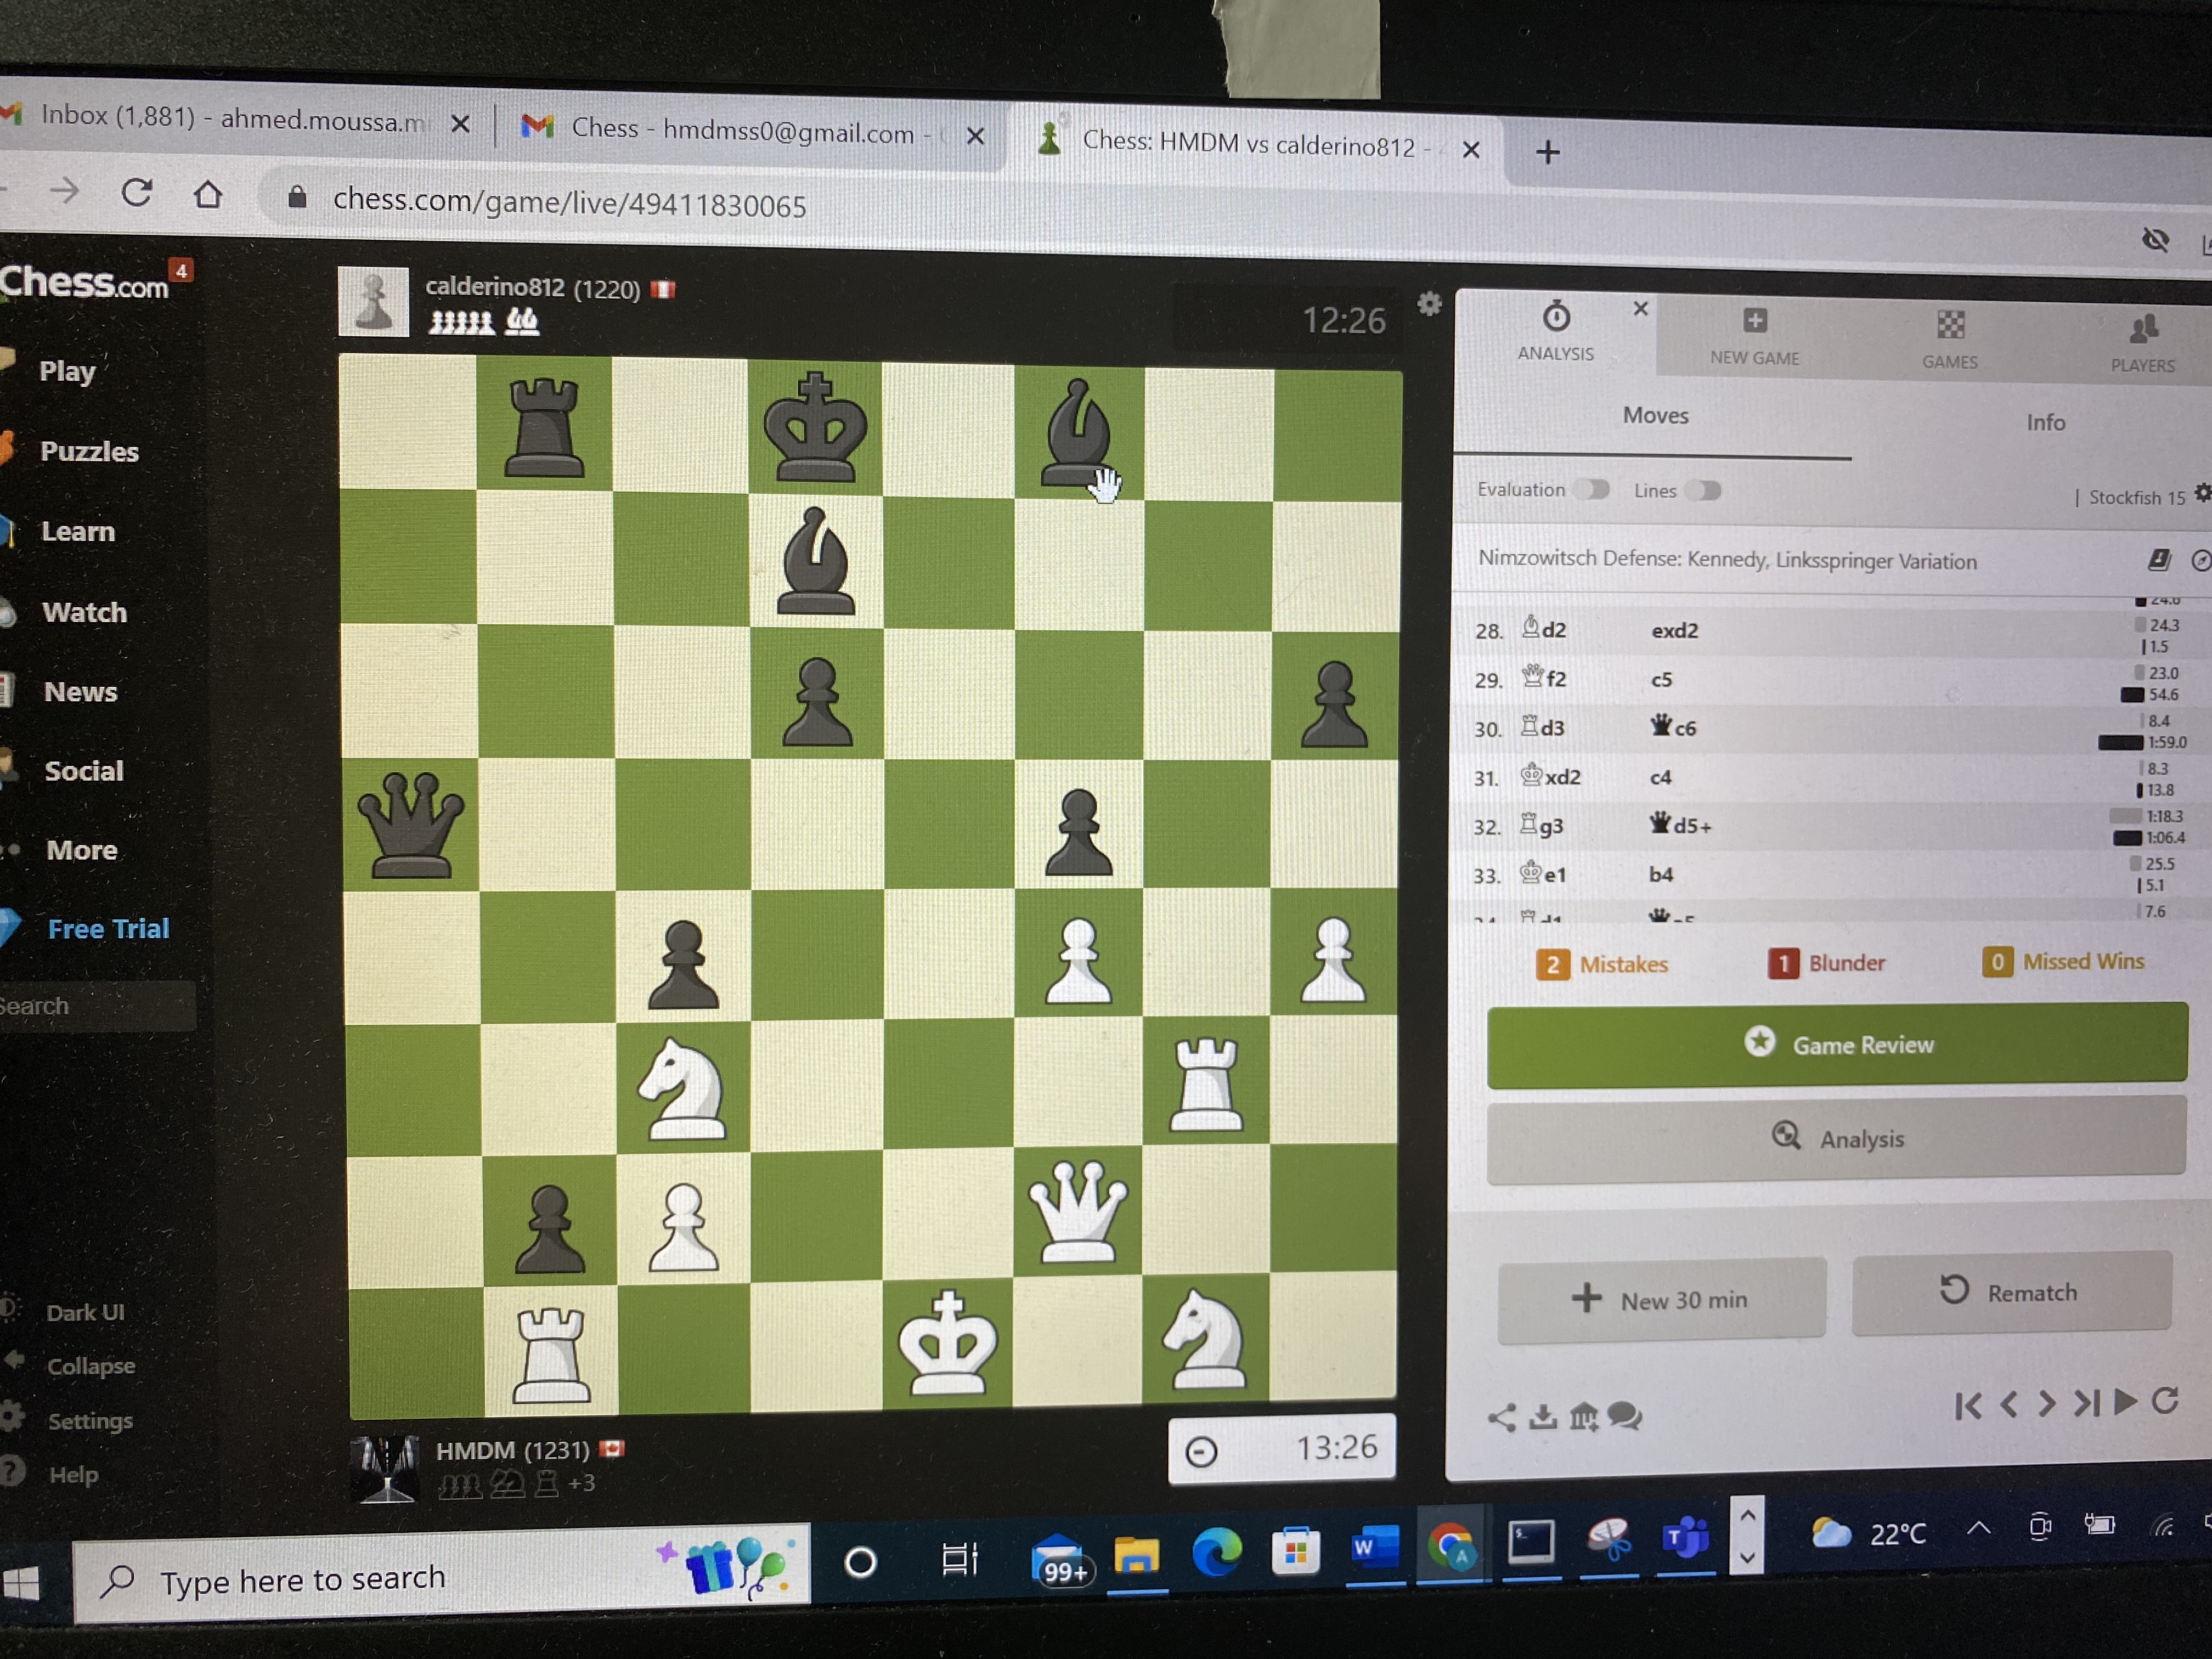 UPDATED] 10 Minute Chess Now Rapid Rated, Bullet Ratings Increased - Chess .com